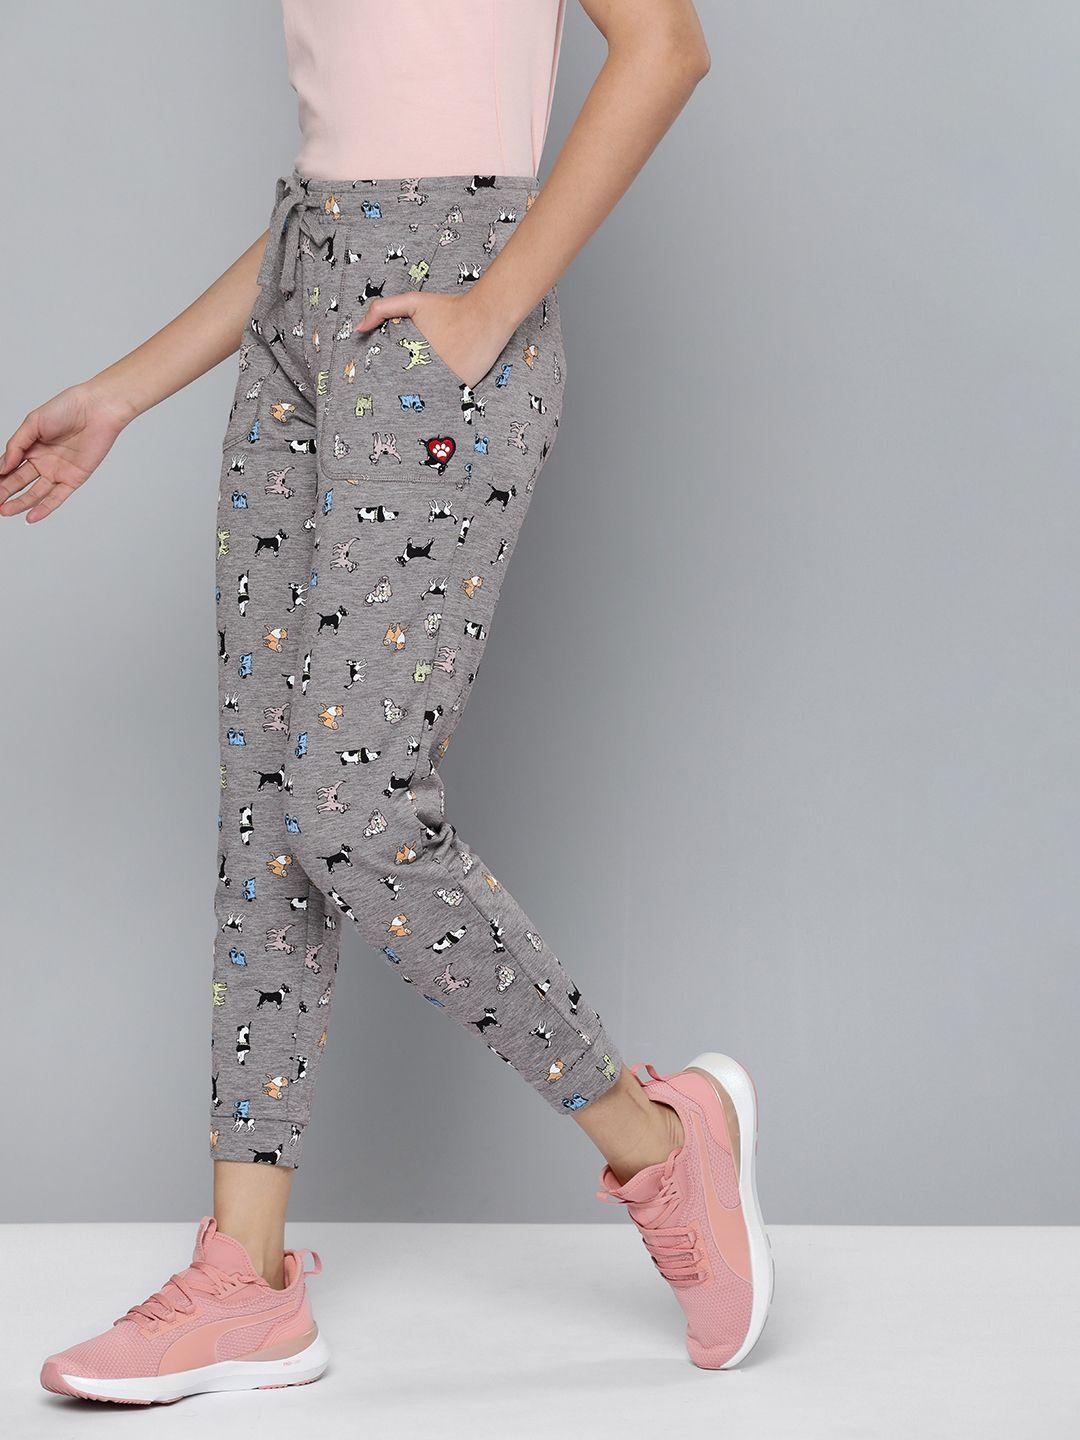 skechers-women-graphic-printed-regular-fit-spotted-dog-joggers